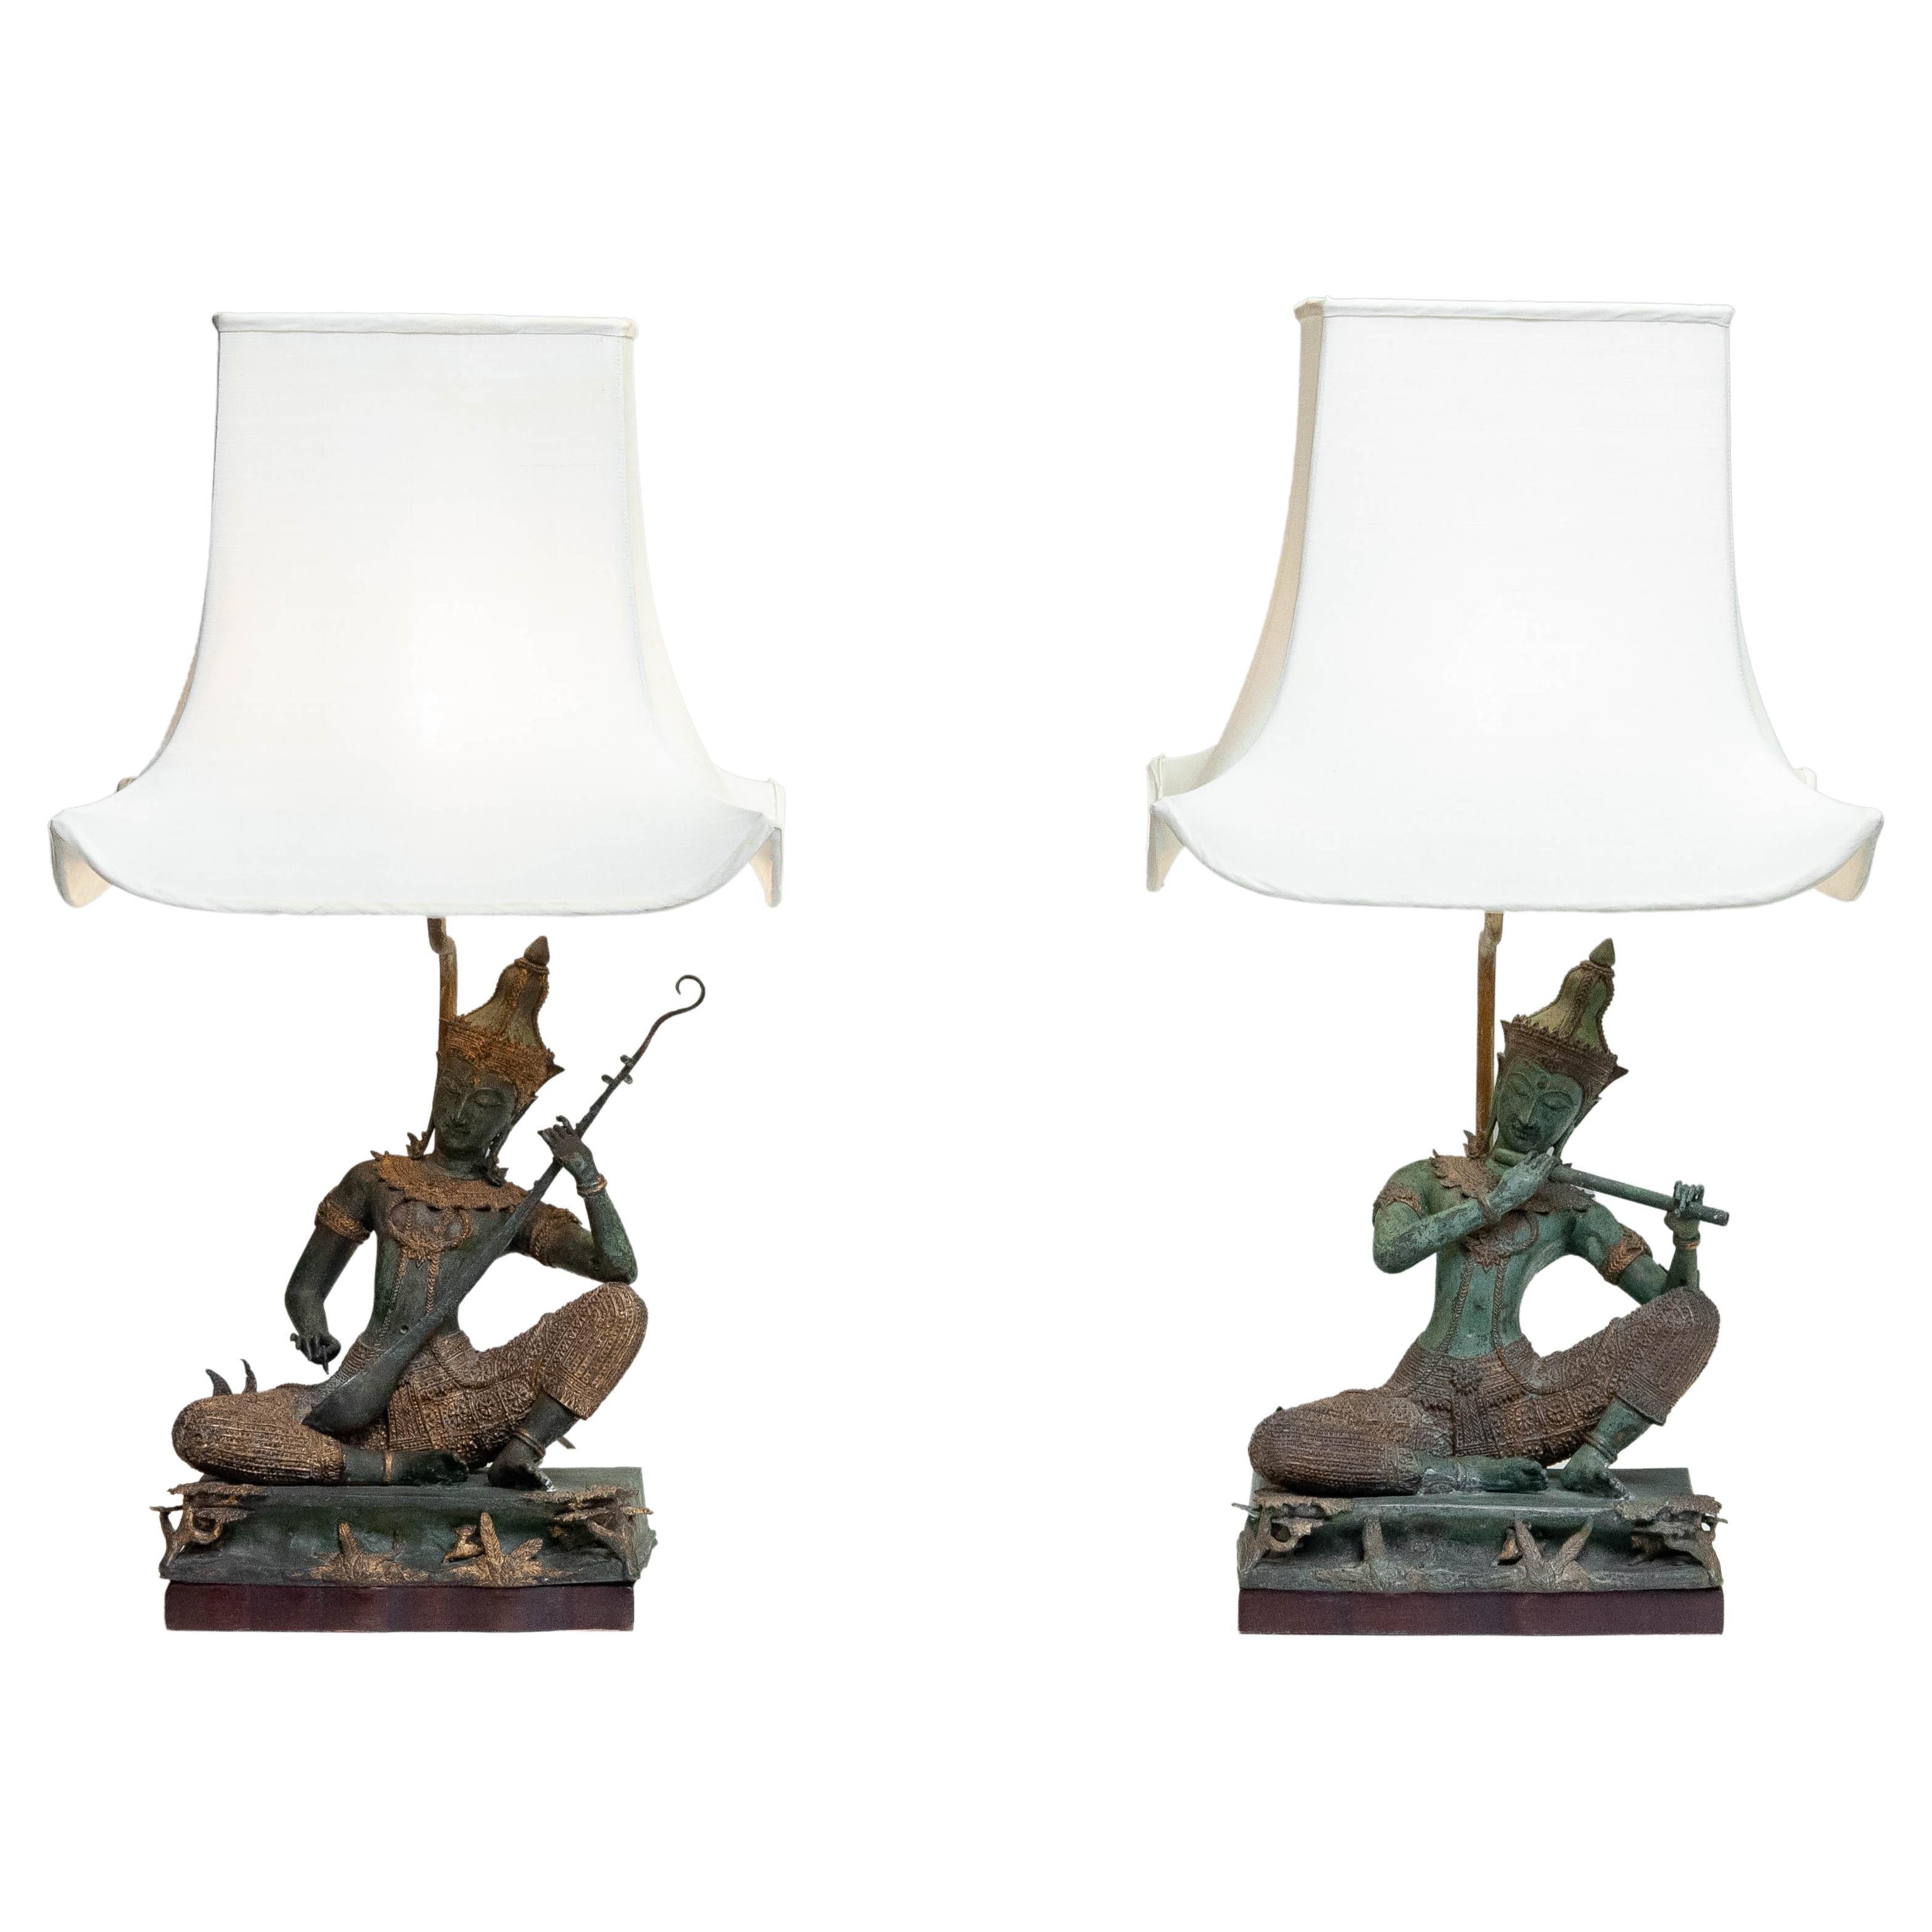 1970s Asian Vintage Table Lamps with Bronze / Gild Statues of Phra Aphai Mani For Sale